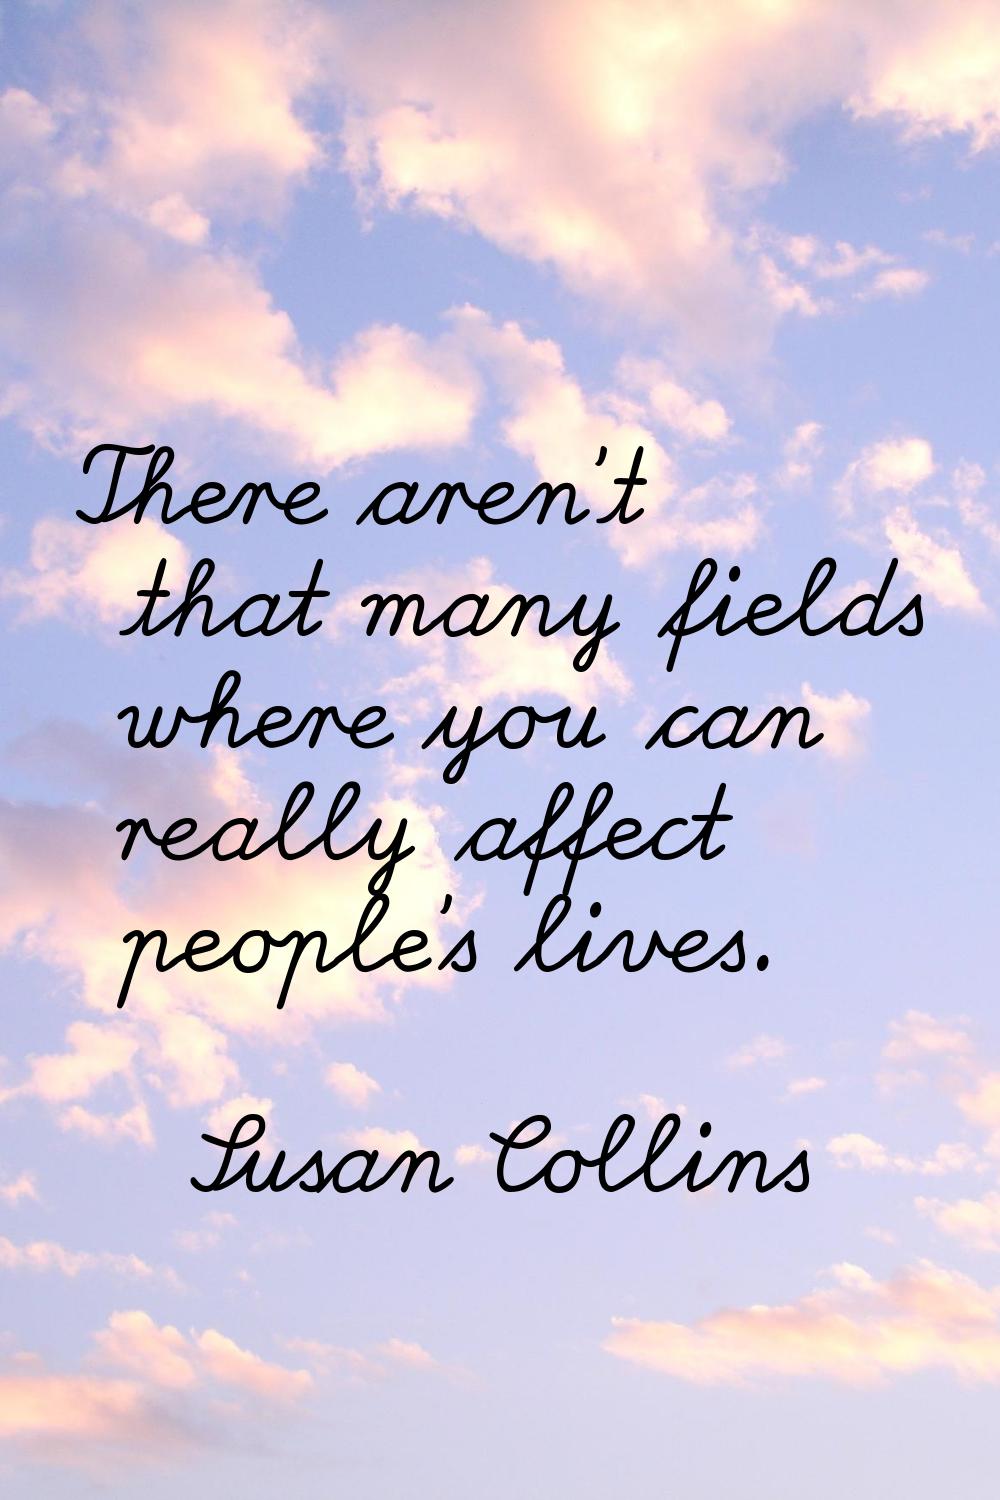 There aren't that many fields where you can really affect people's lives.